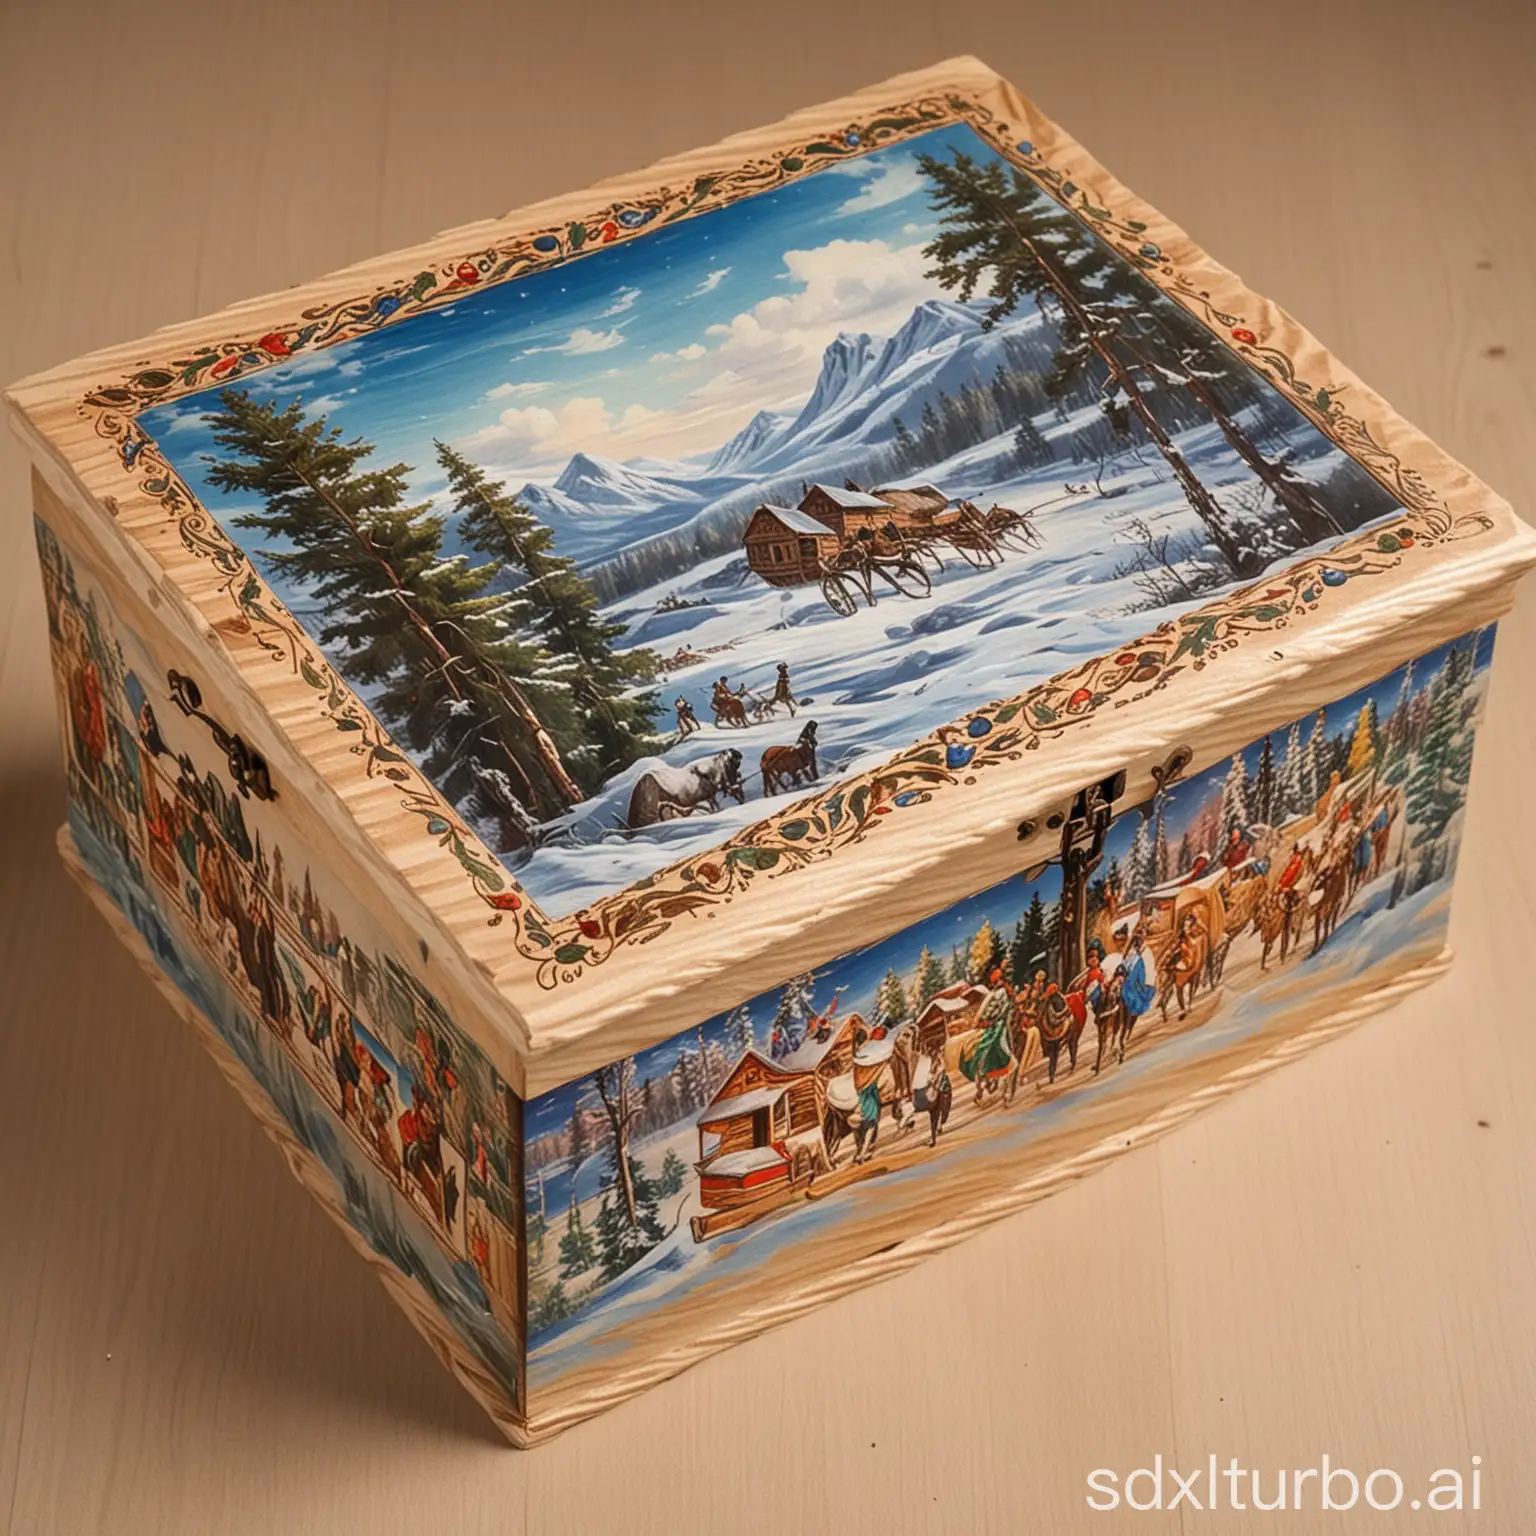 HandPainted-Siberian-Souvenir-Wooden-Box-Crafted-by-Local-Artisans